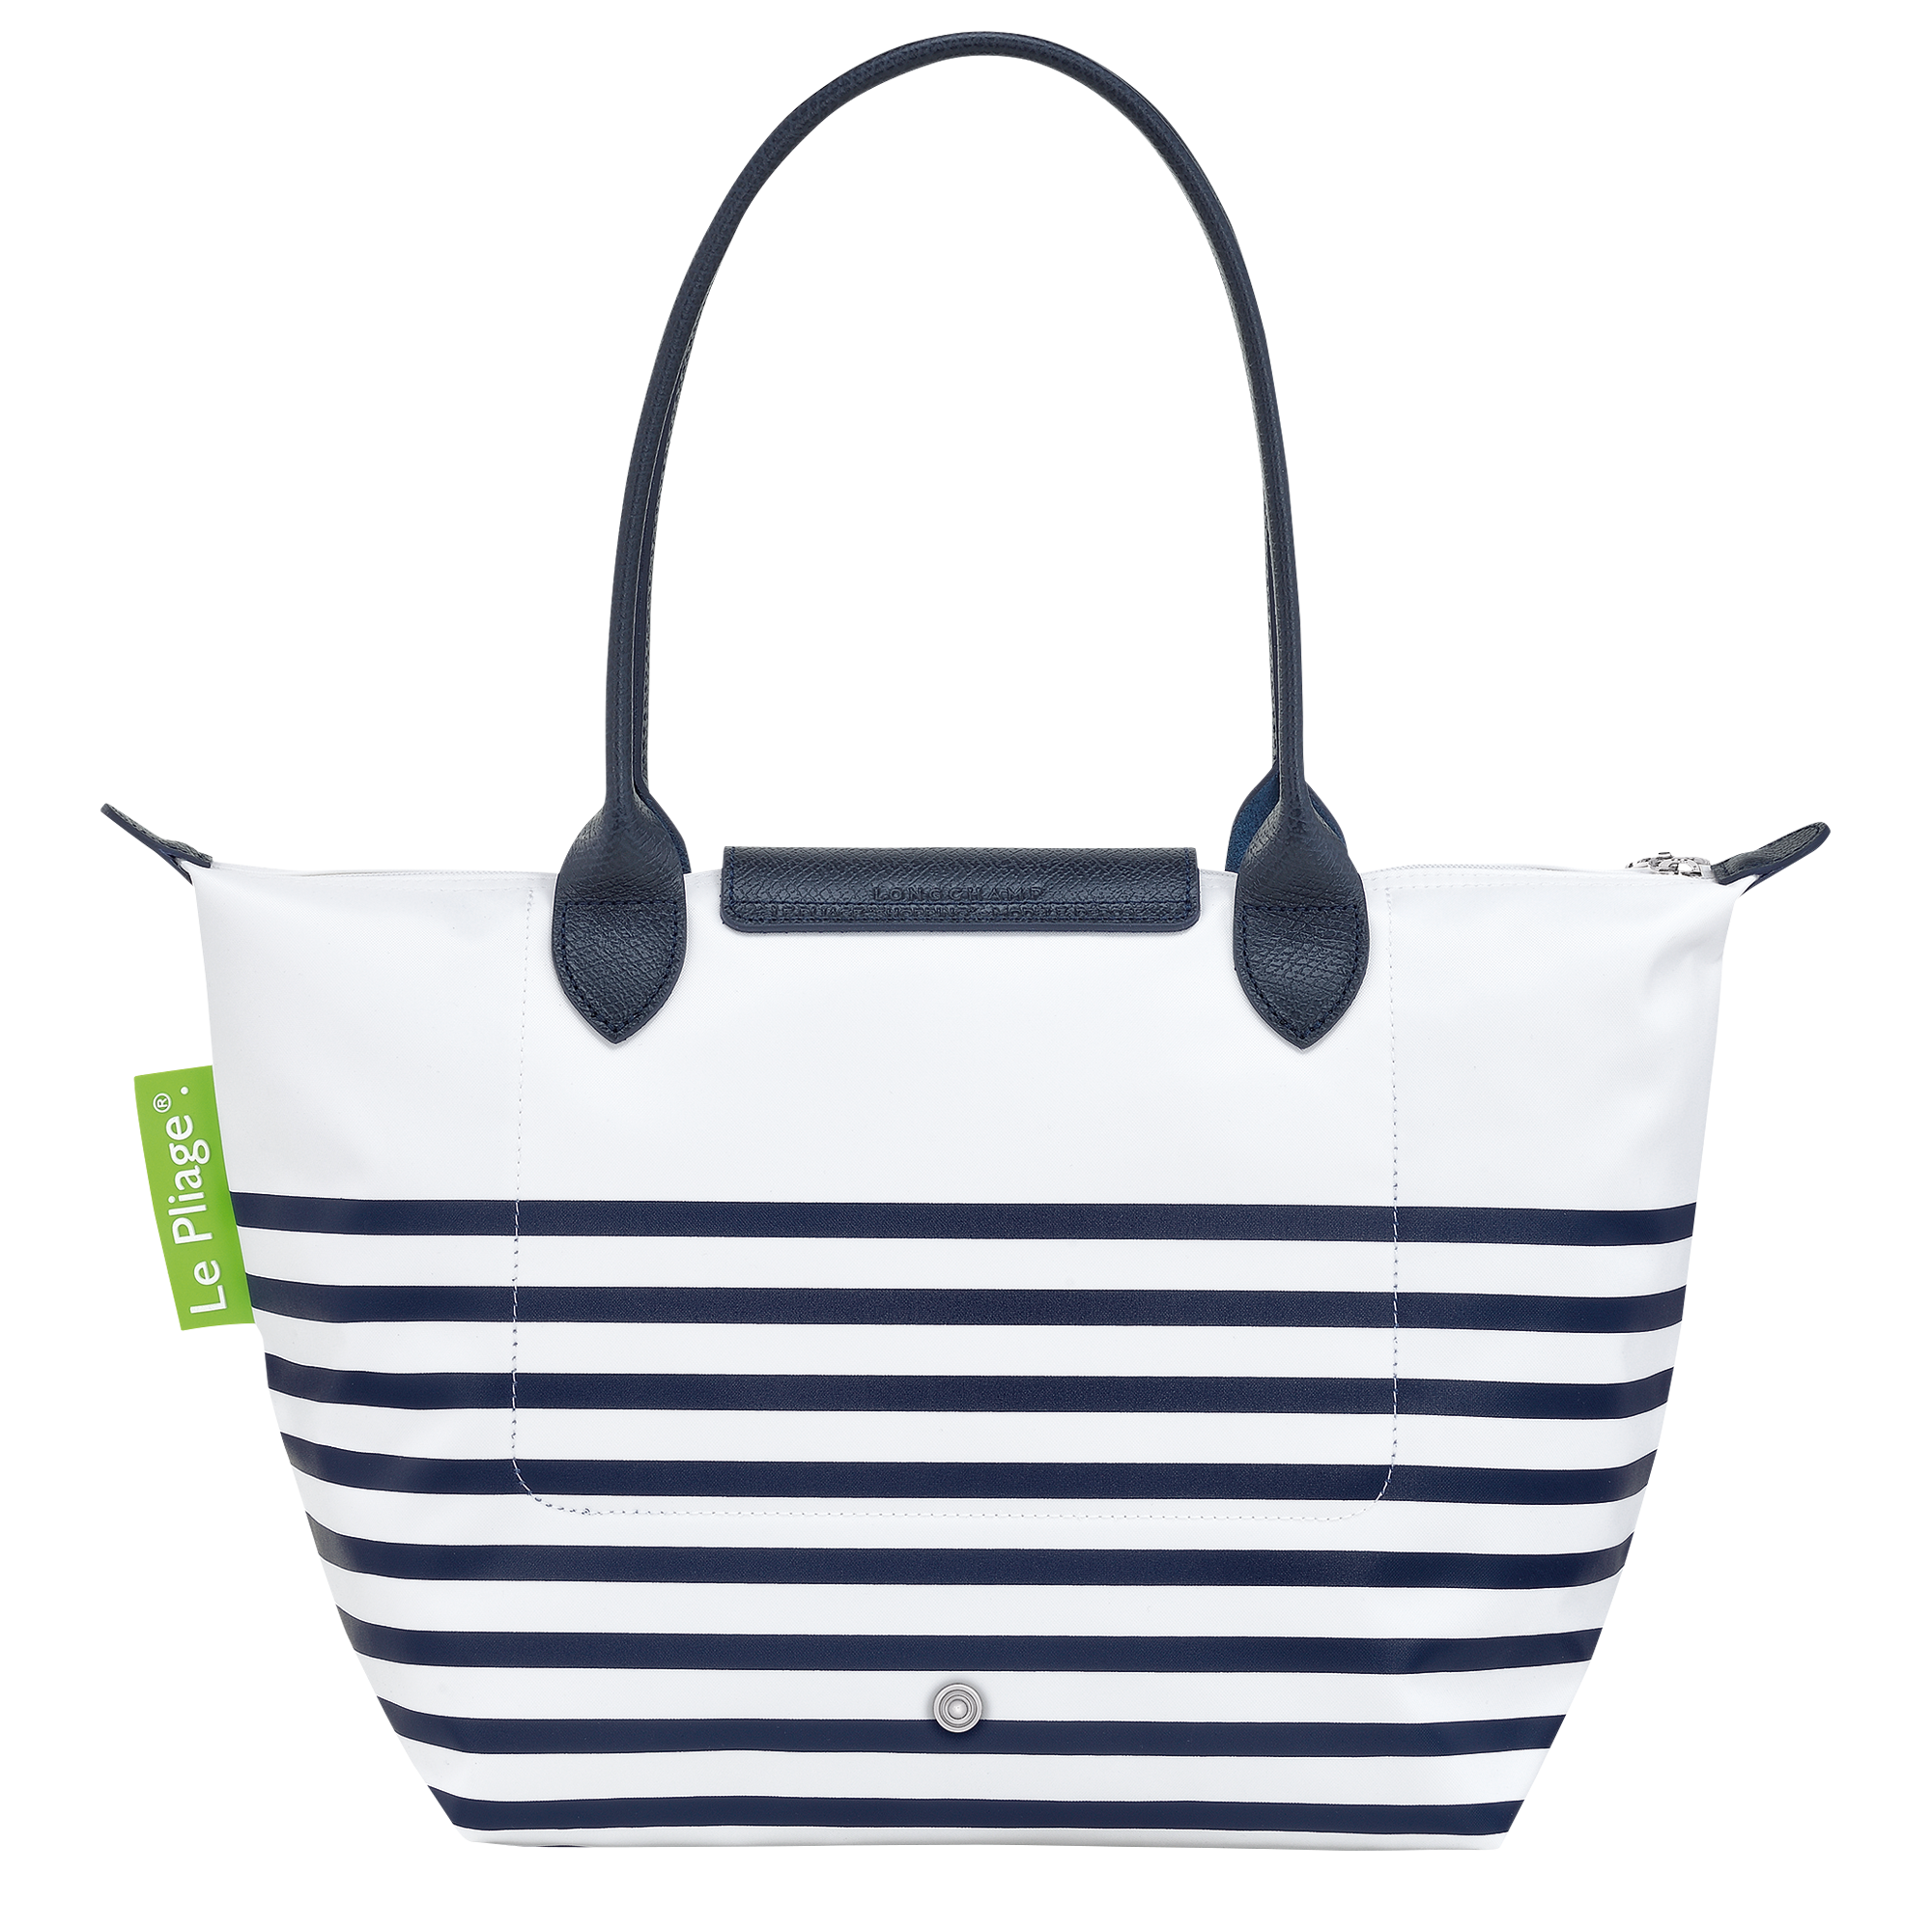 Longchamp LE PLIAGE COLLECTION - Tote bag M in Navy/White - 3 (SKU: L2605HDF165)